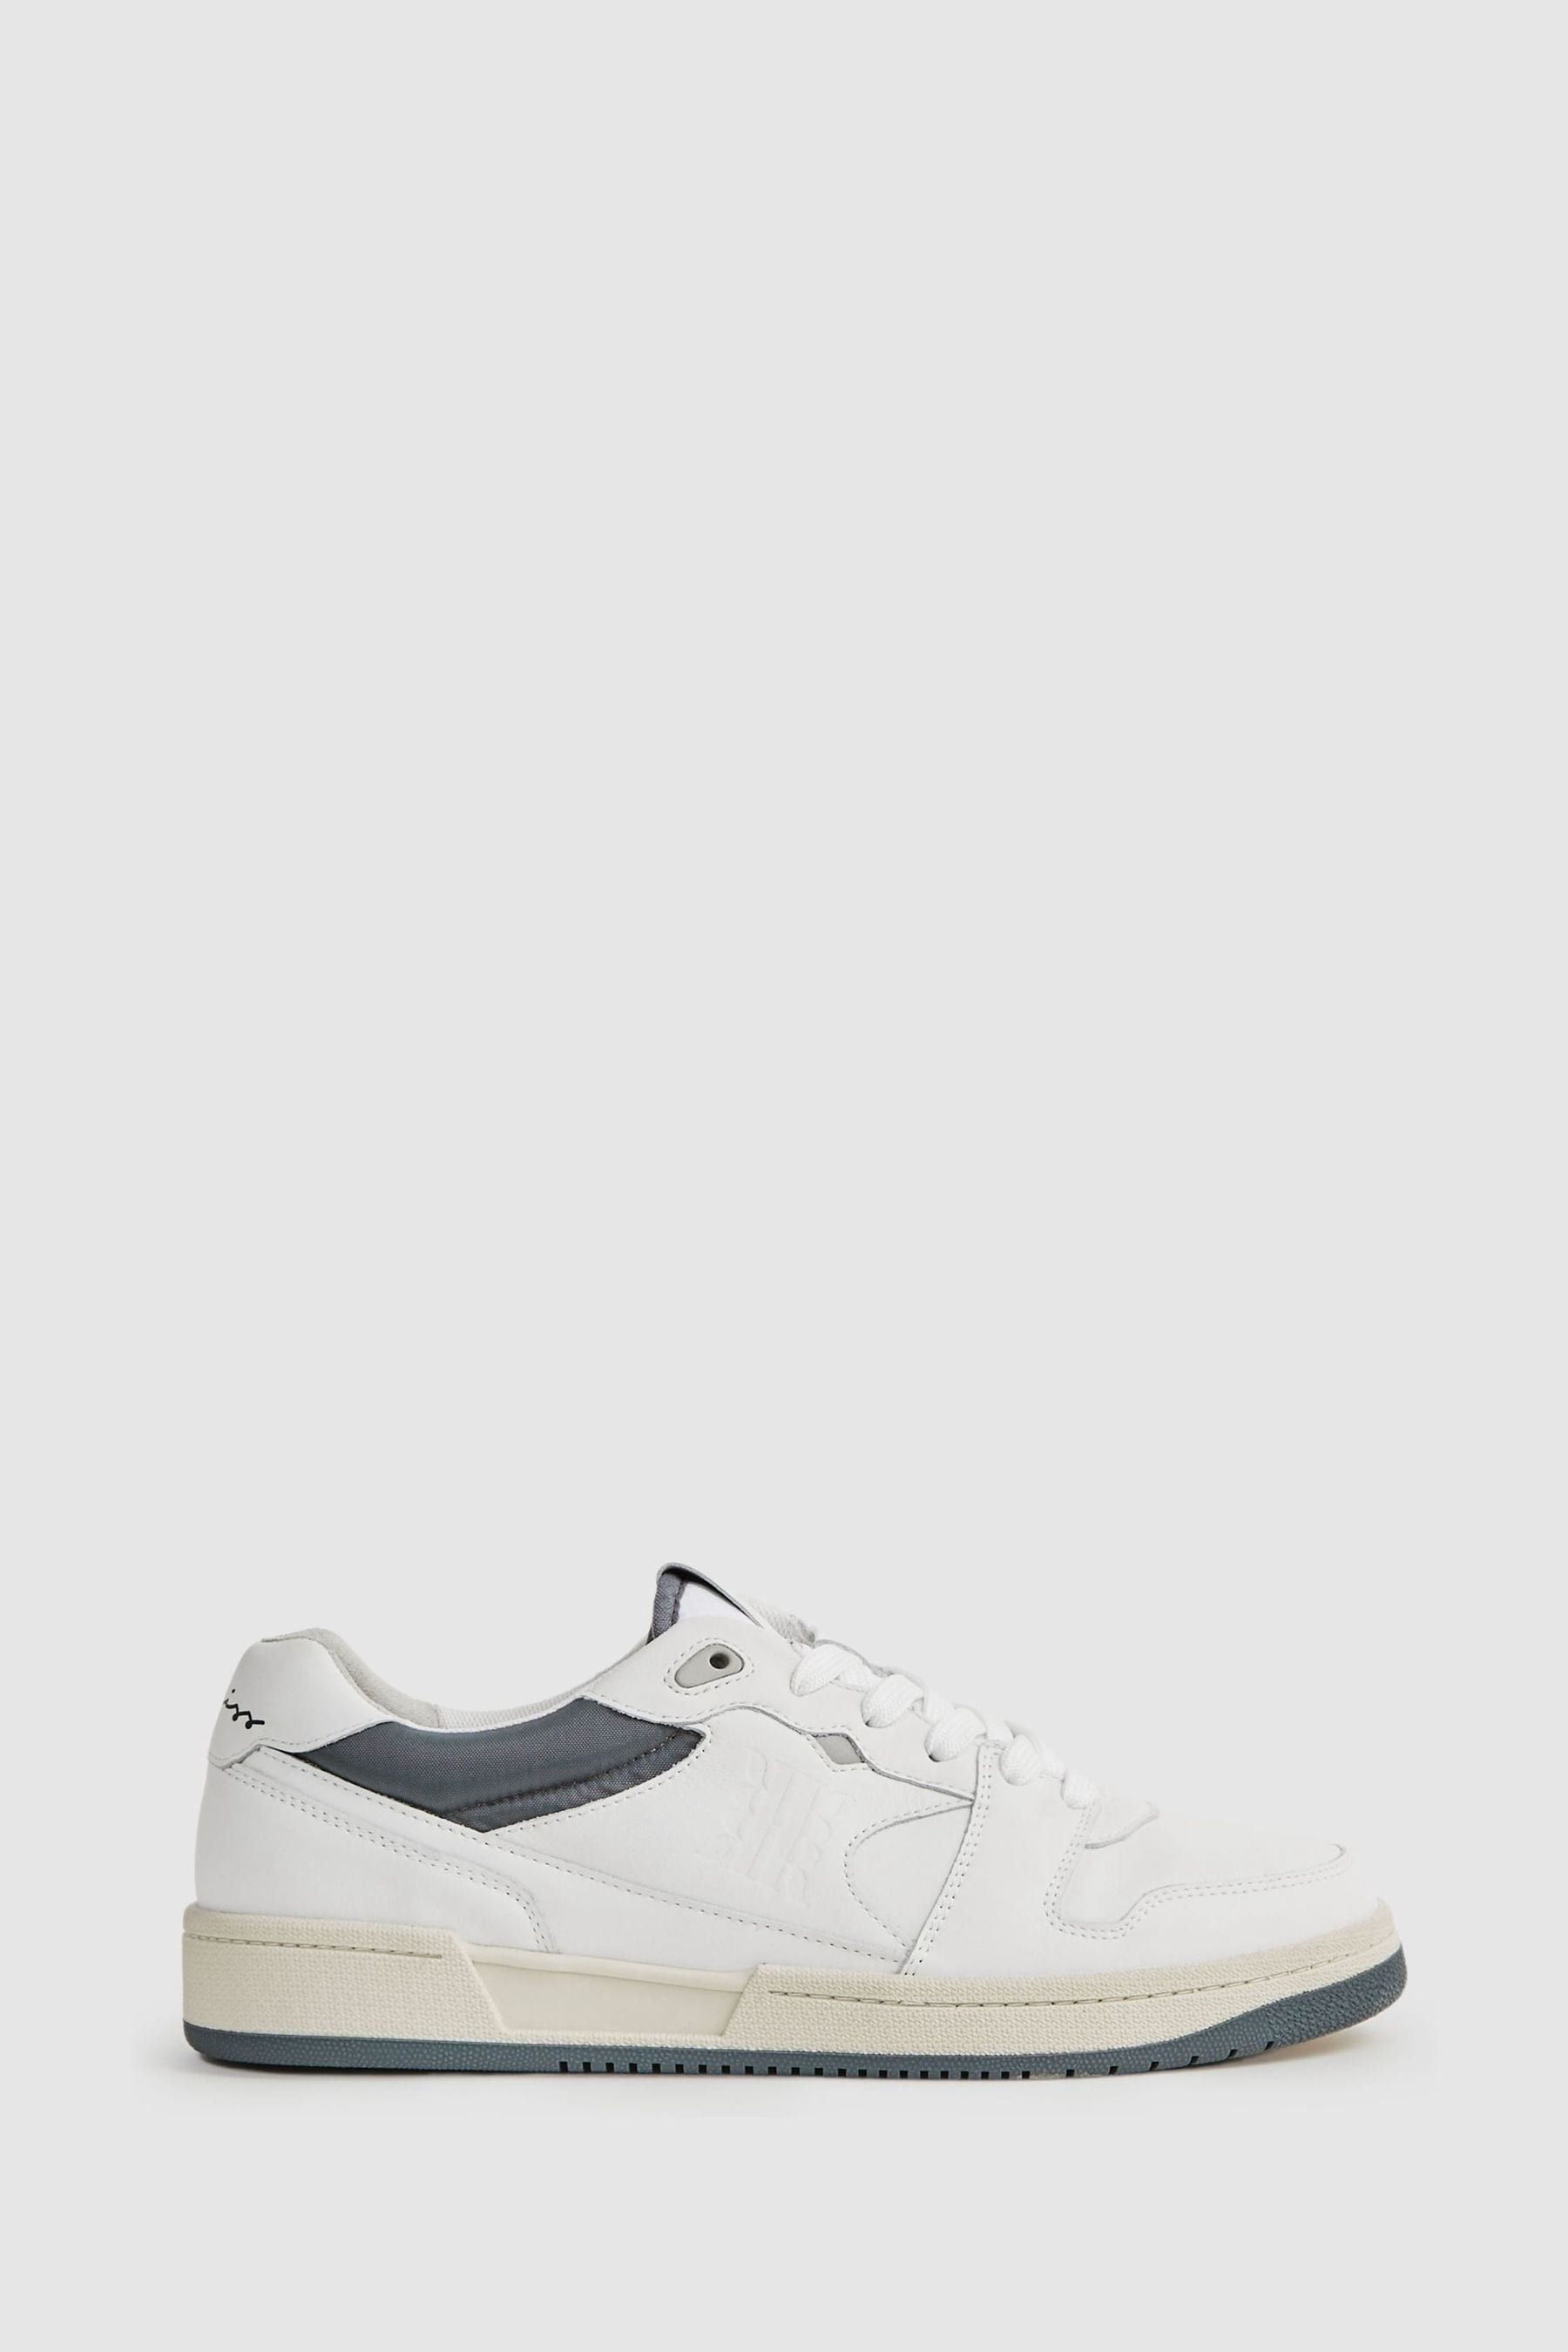 Reiss Astor - White Leather Colourblock Lace-up Trainers, Uk 9 Eu 43